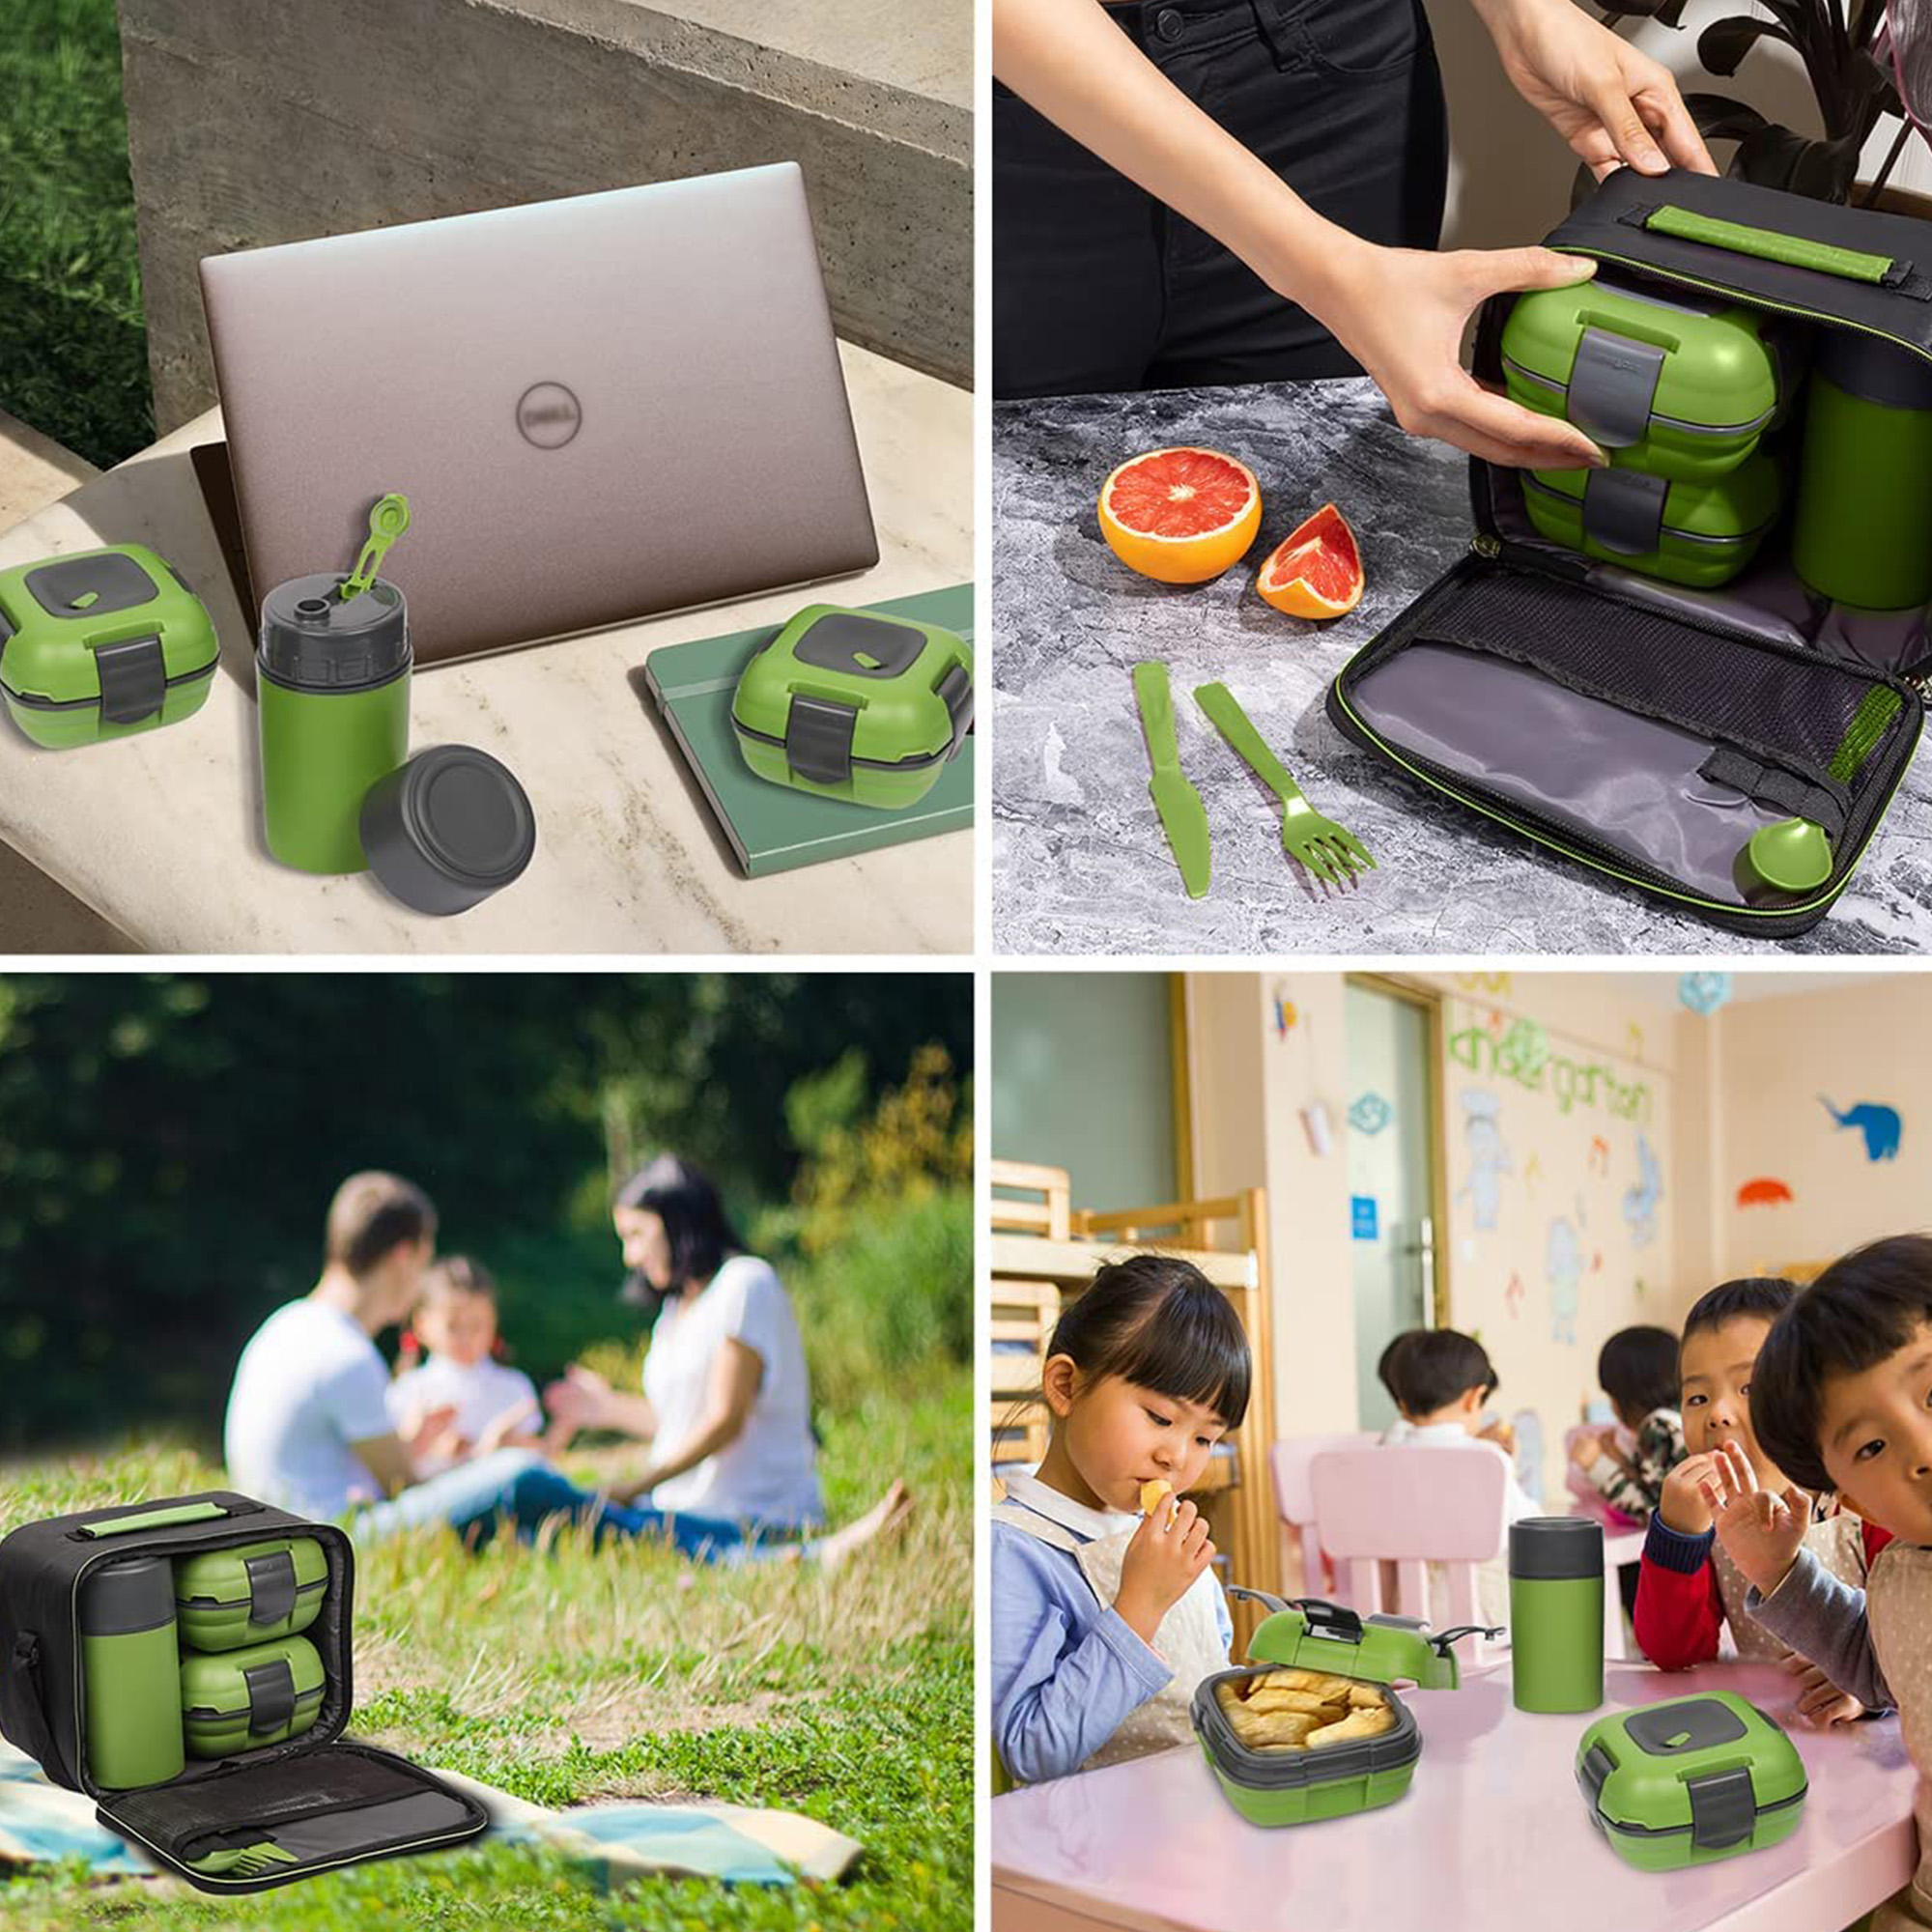 Pinnacle Thermoware Thermal Lunch Box Set Lunch Containers for Adults & Kids, Green - image 2 of 9